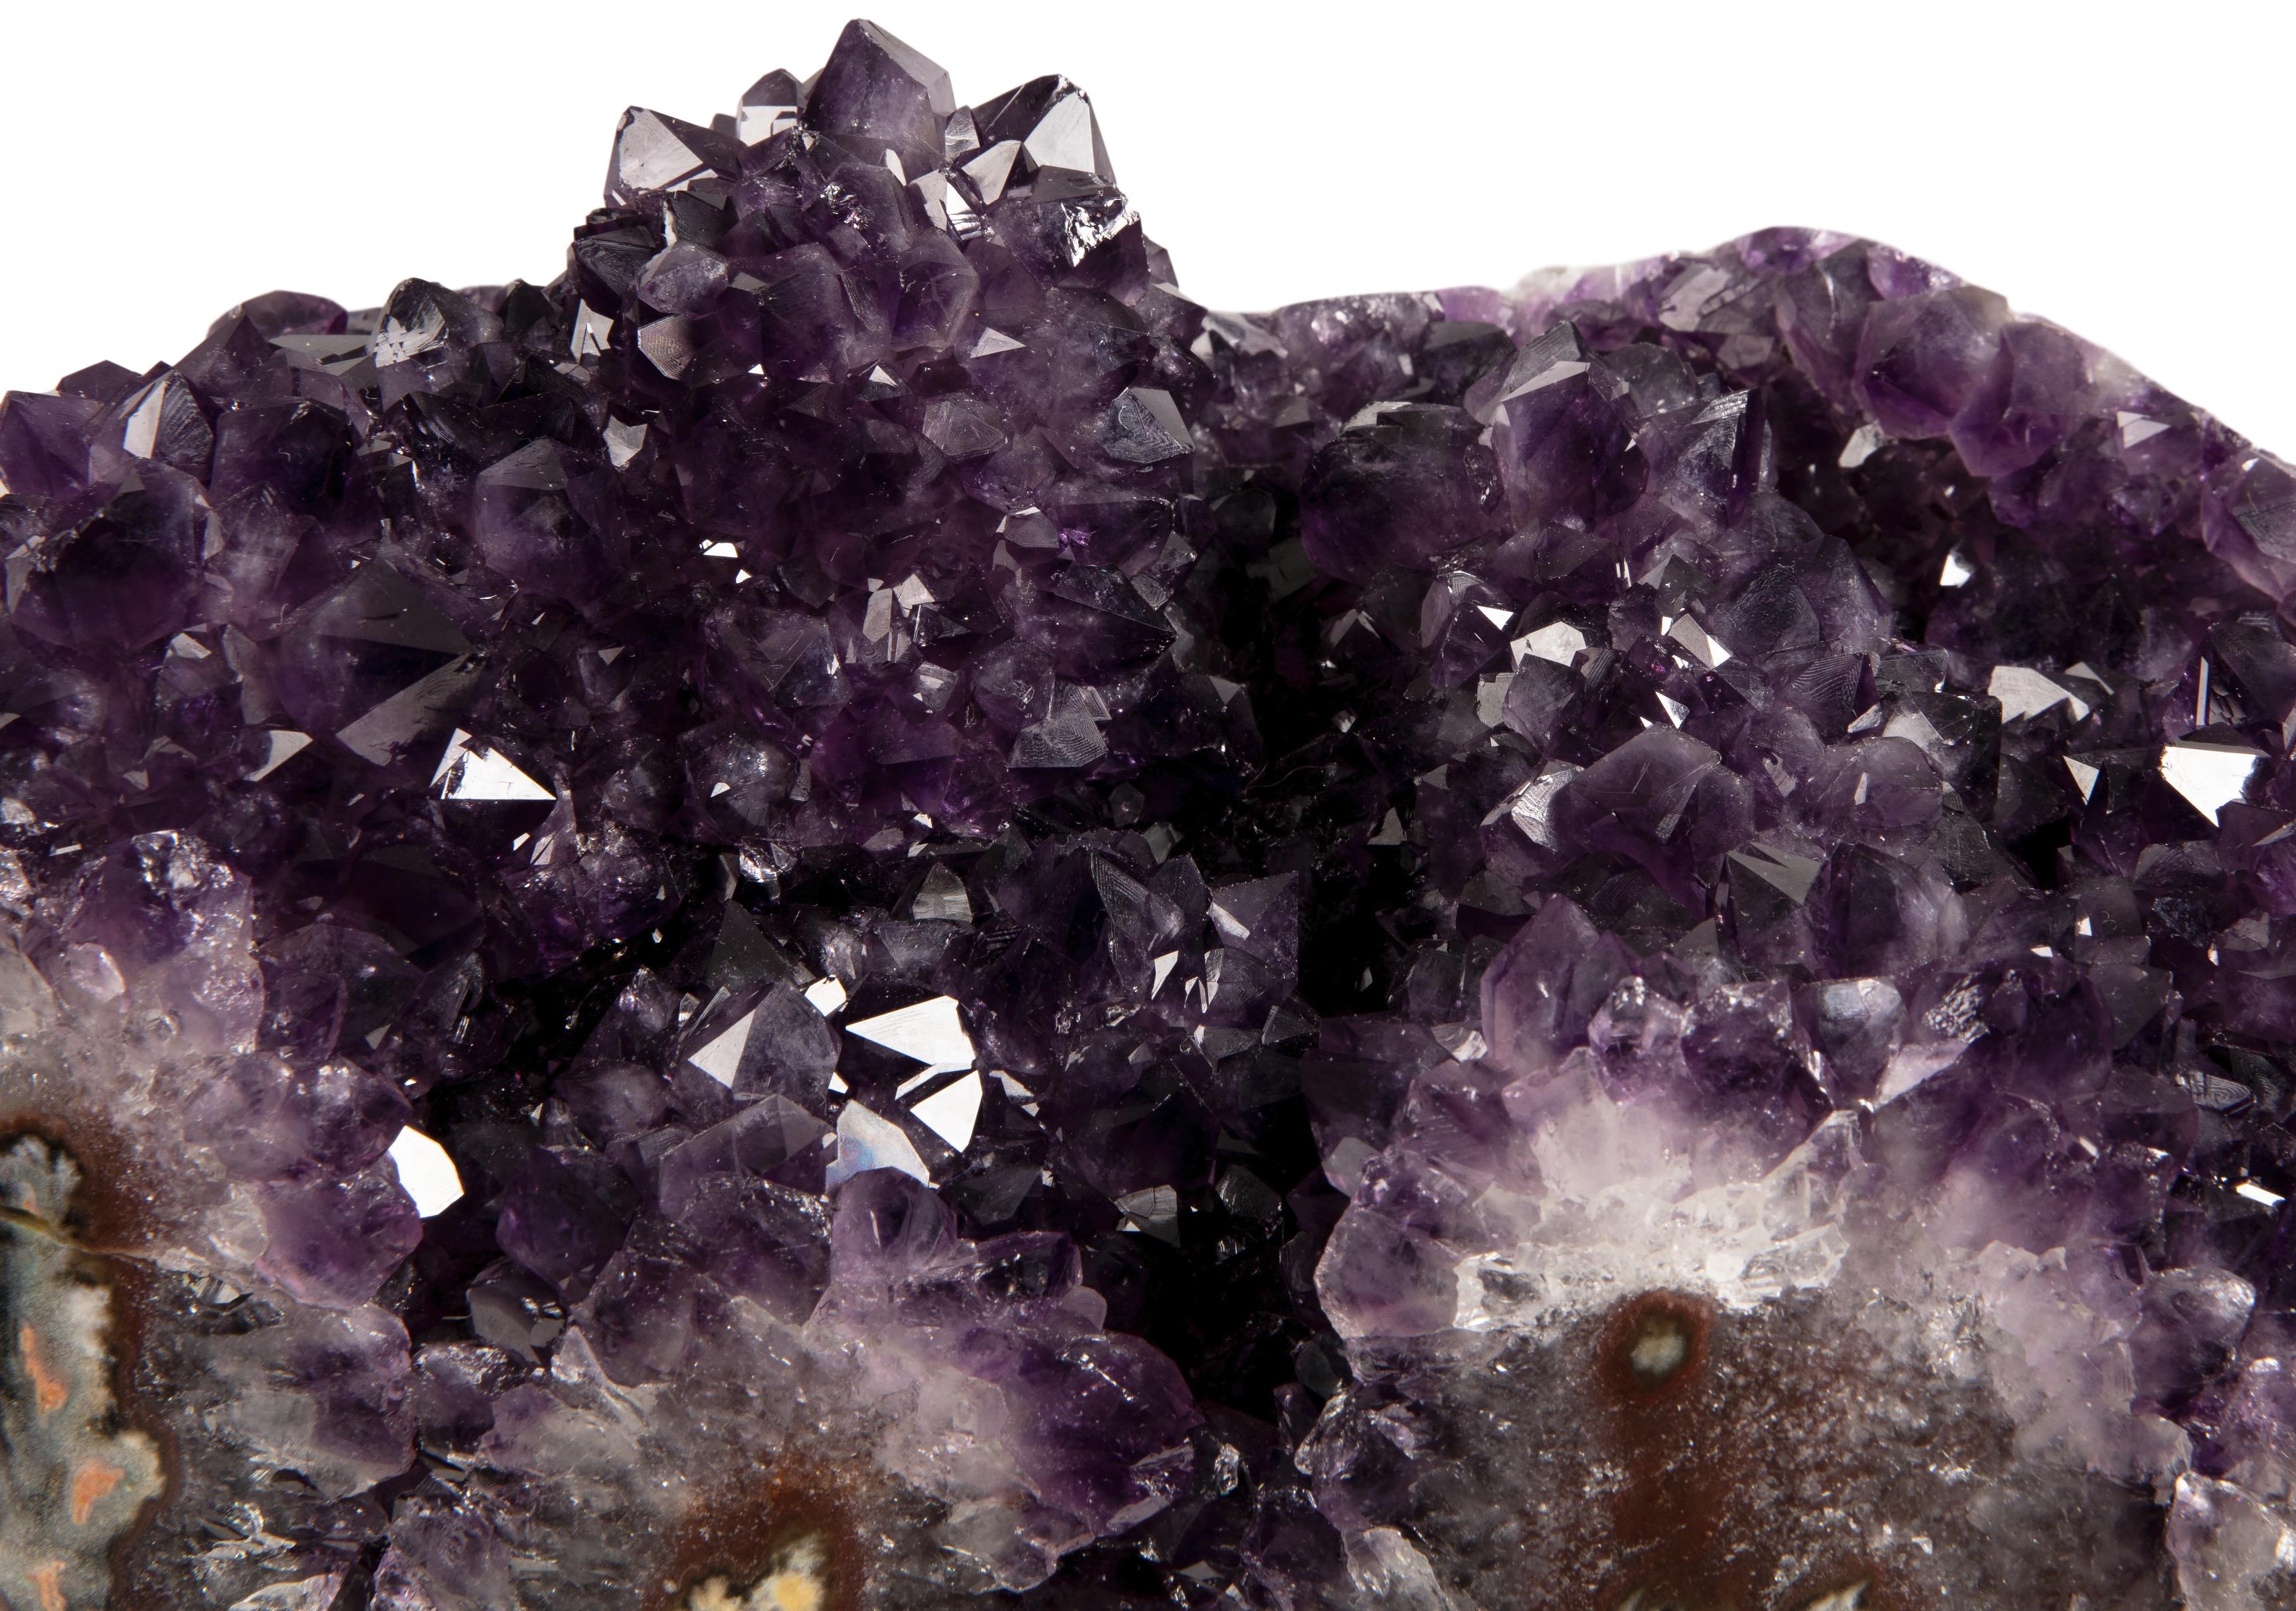 Uruguayan Small Cluster of Amethyst Stalactite Formations - Mineral Display piece For Sale